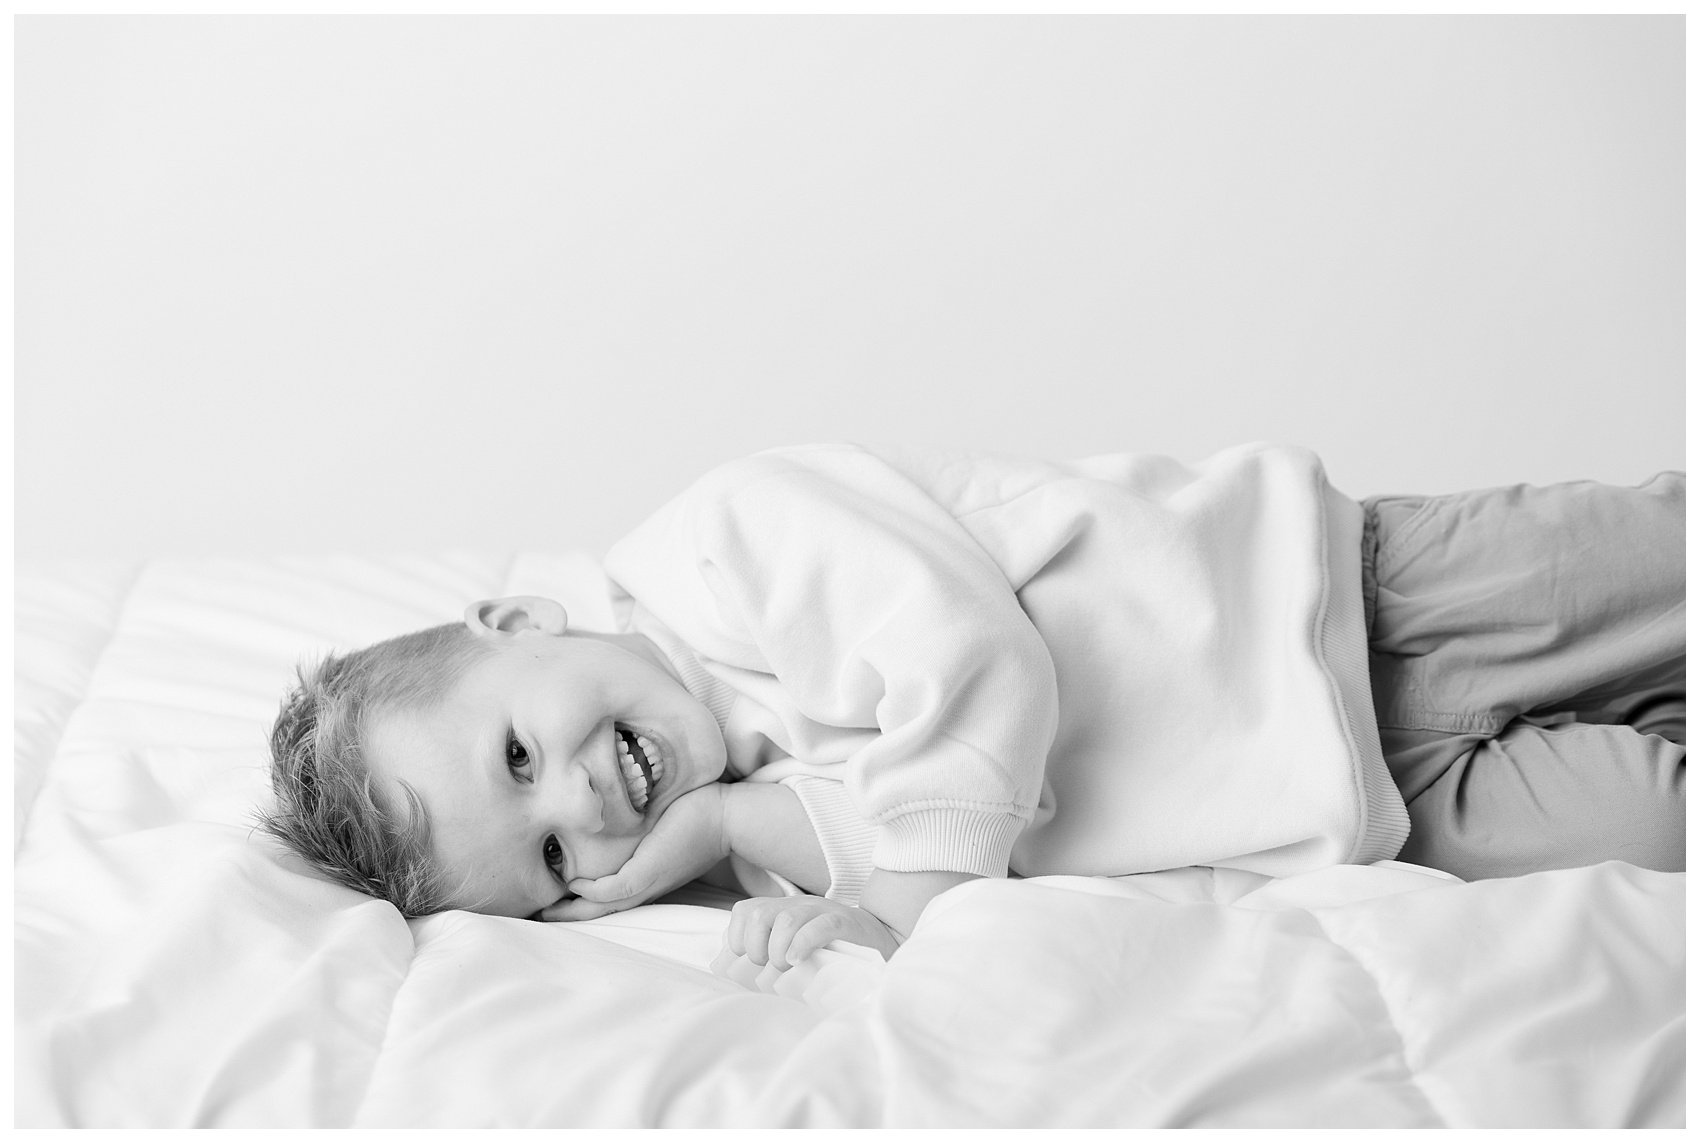 Session in all white studio in Draper, Utah. Child portrait photographed by Stephanie Lorraine Photography.